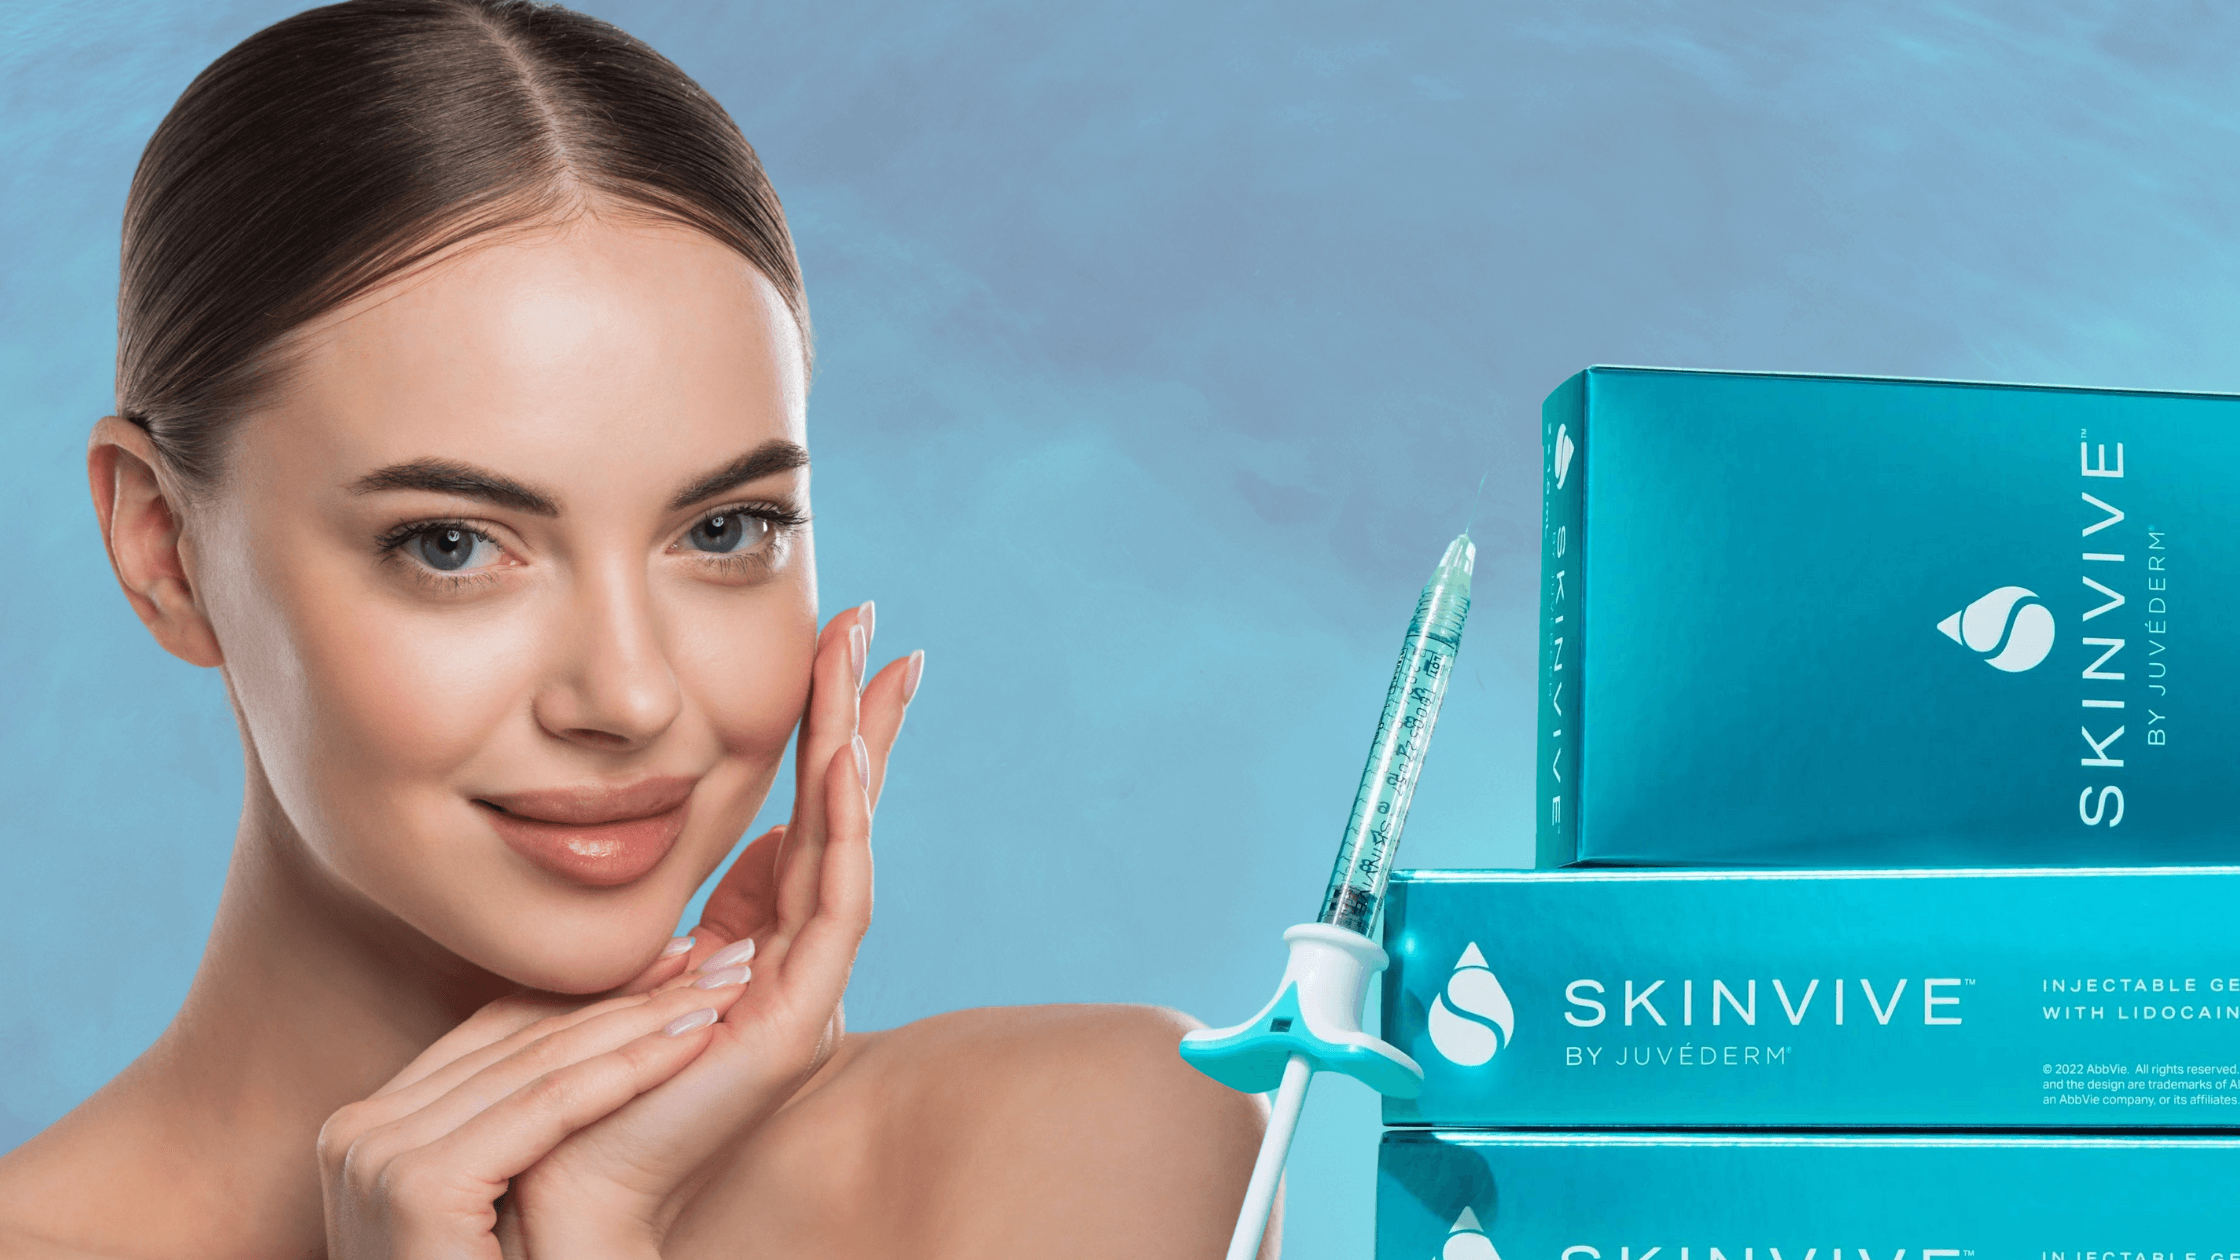 The Complete Guide to SKINVIVE: The Latest Skin Booster Injection!